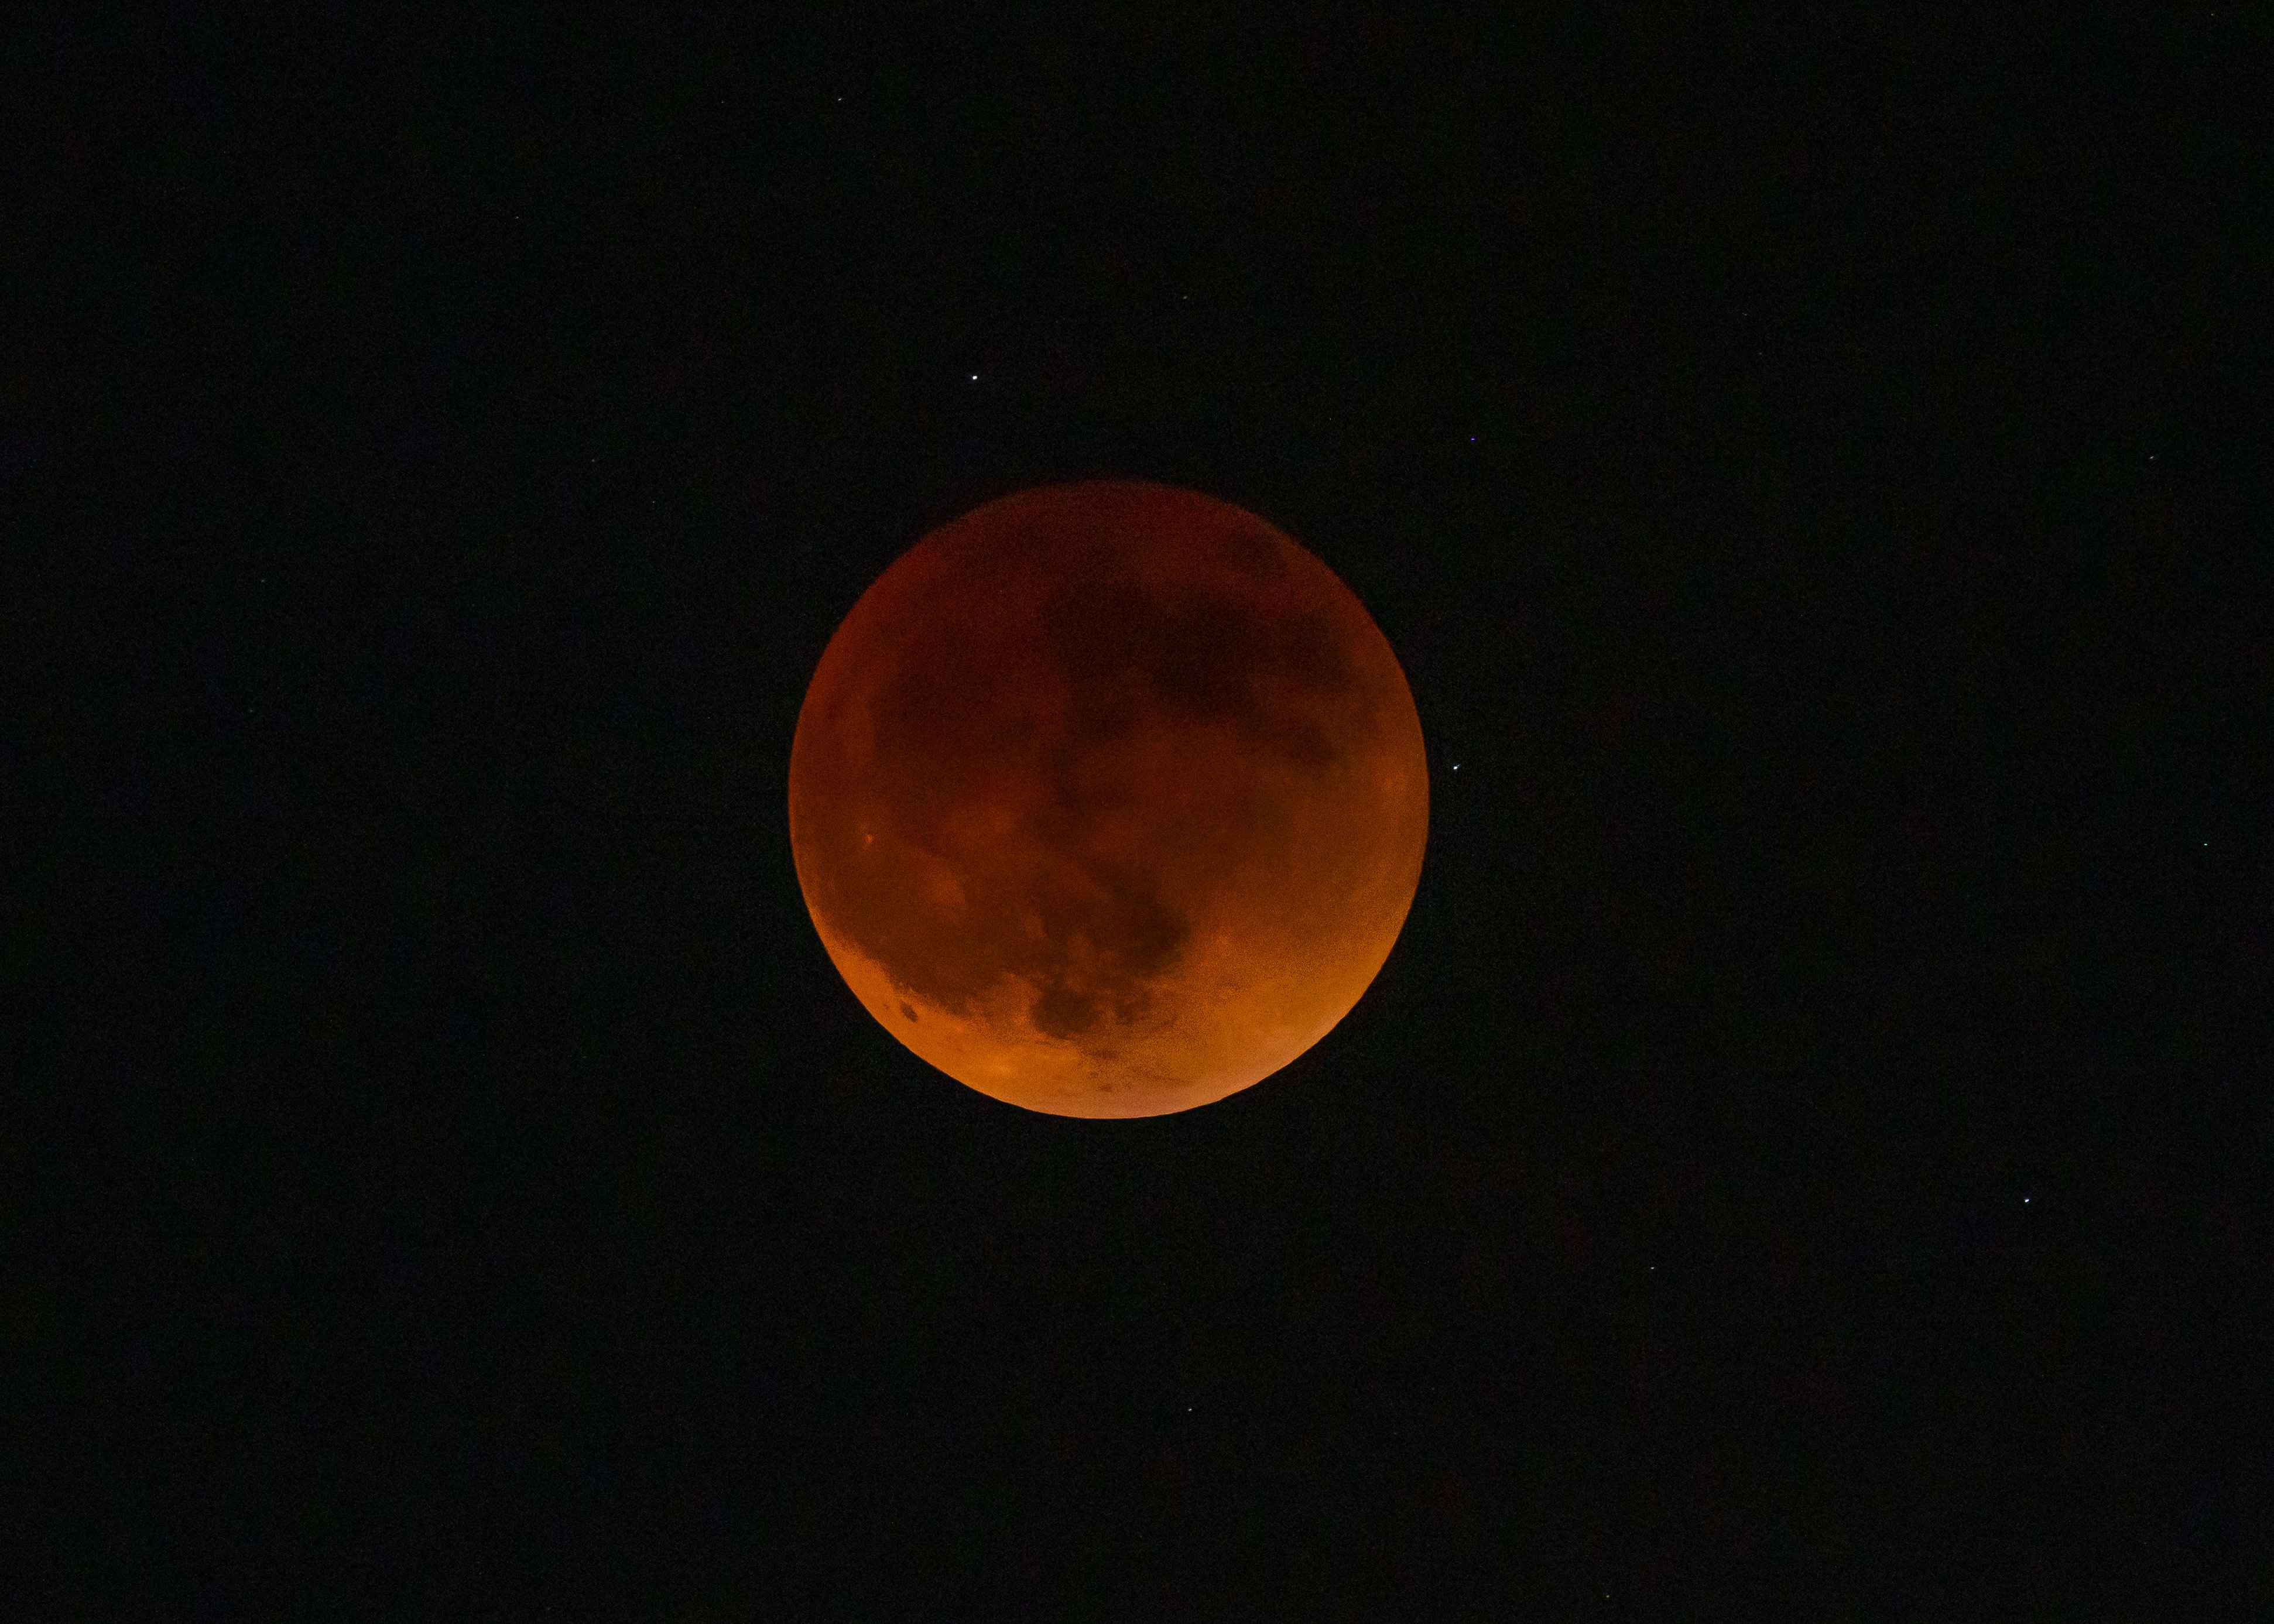 Blood Moon...as good as I could get...Not an astrophotographer